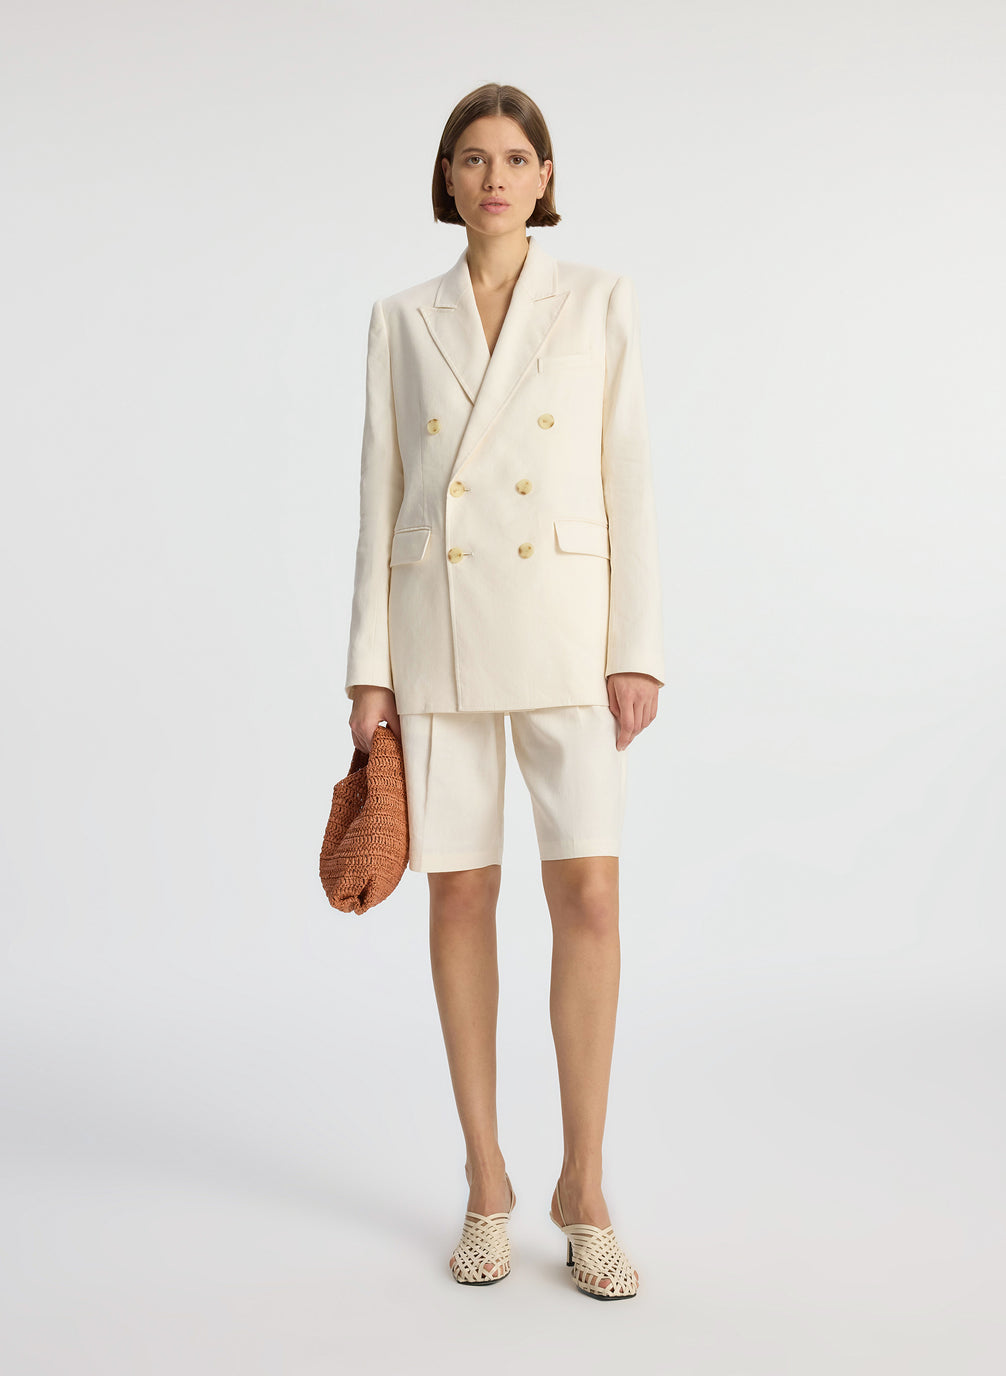 front view of woman wearing cream shorts suit